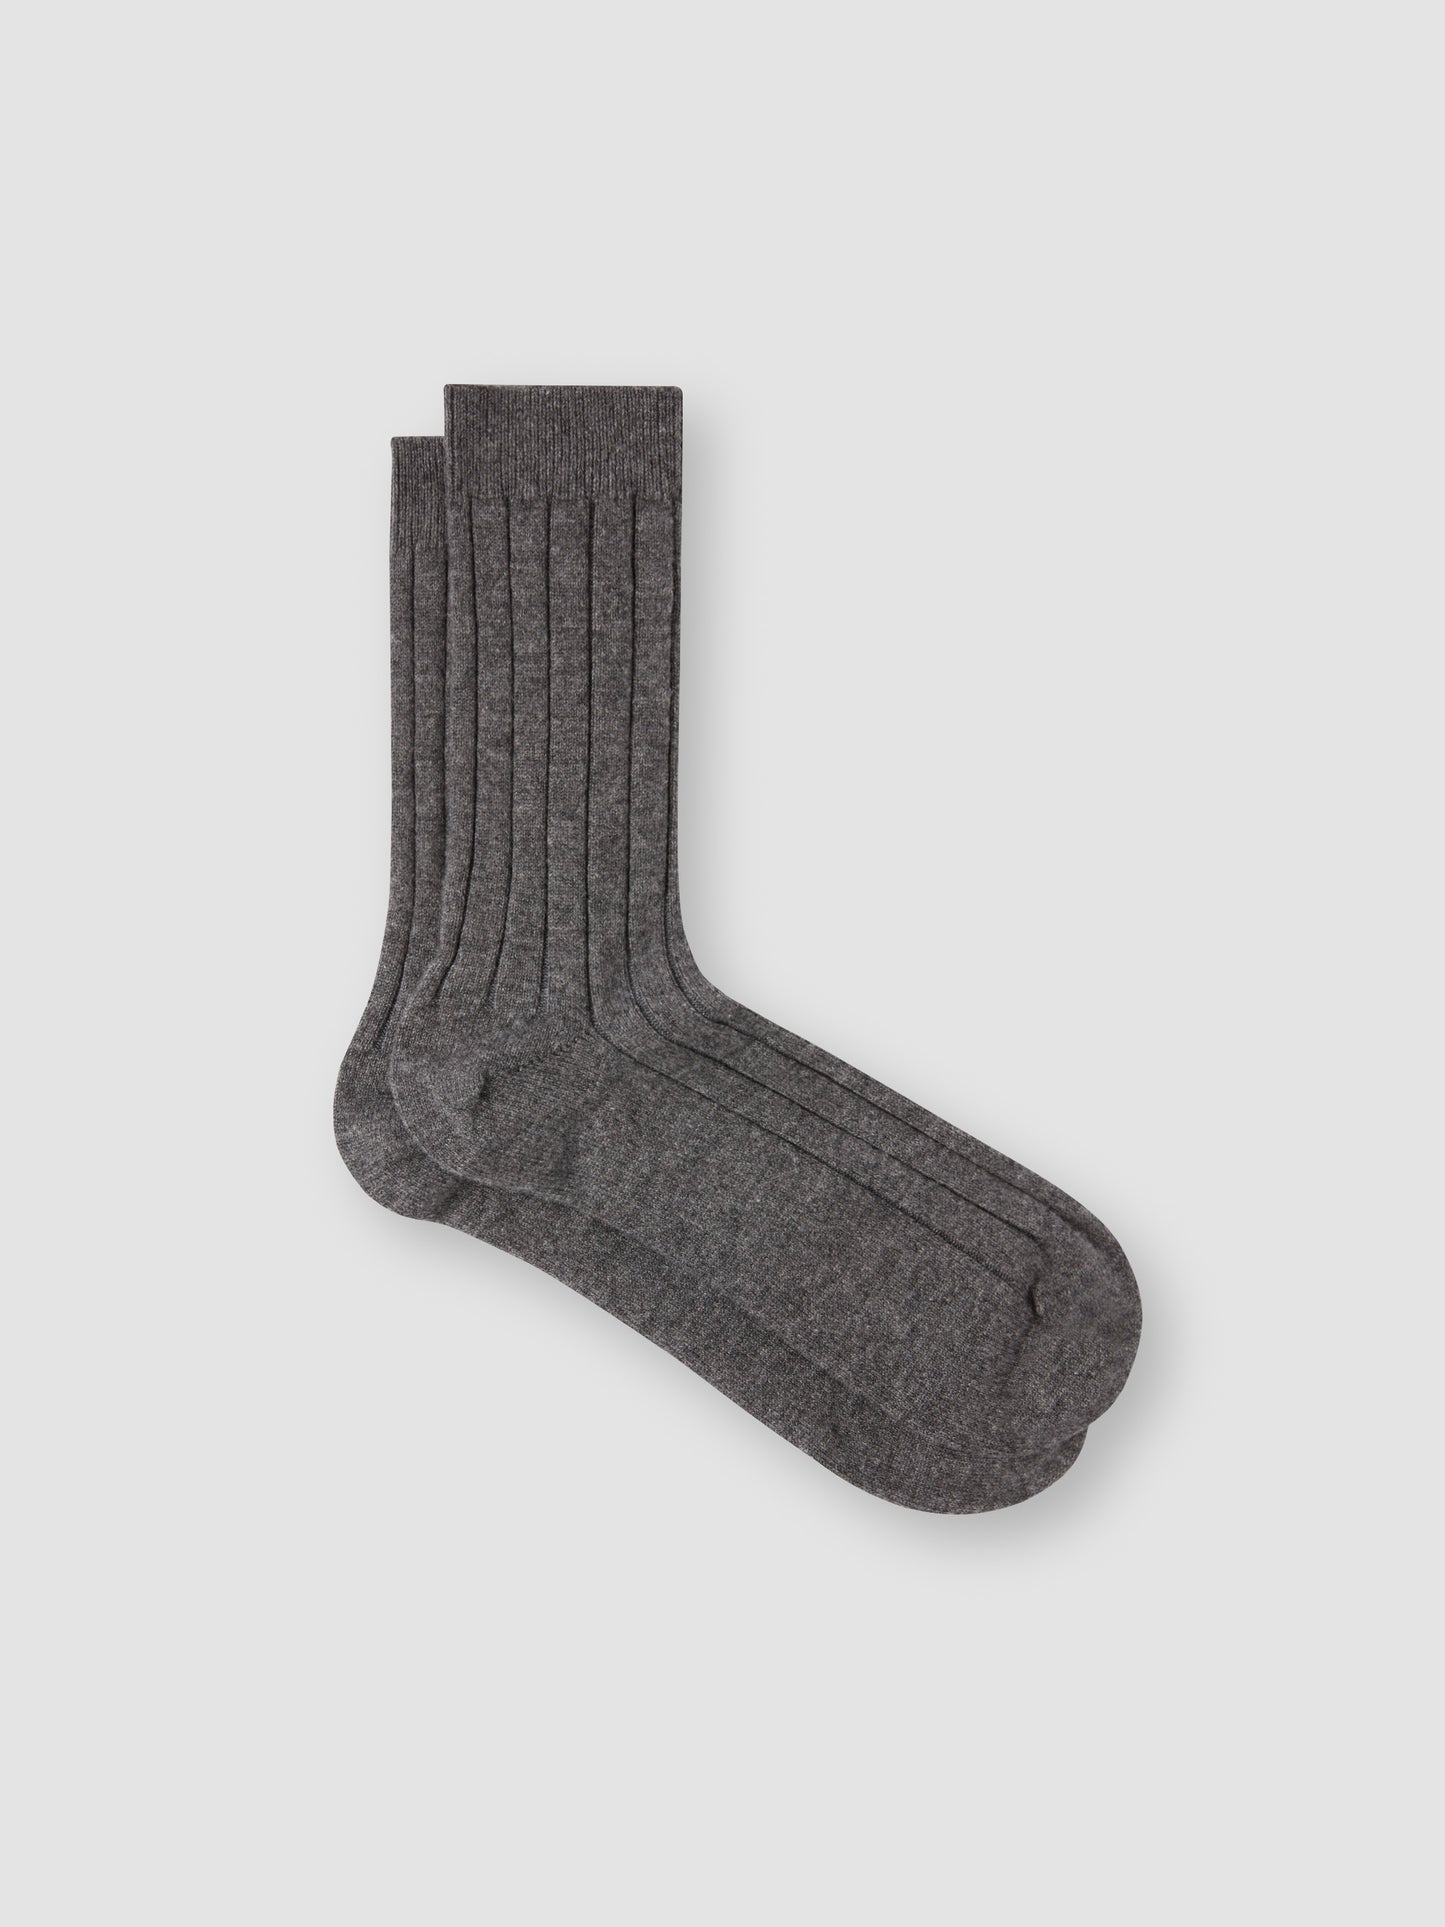 Cashmere Knitted Socks Charcoal Product Image